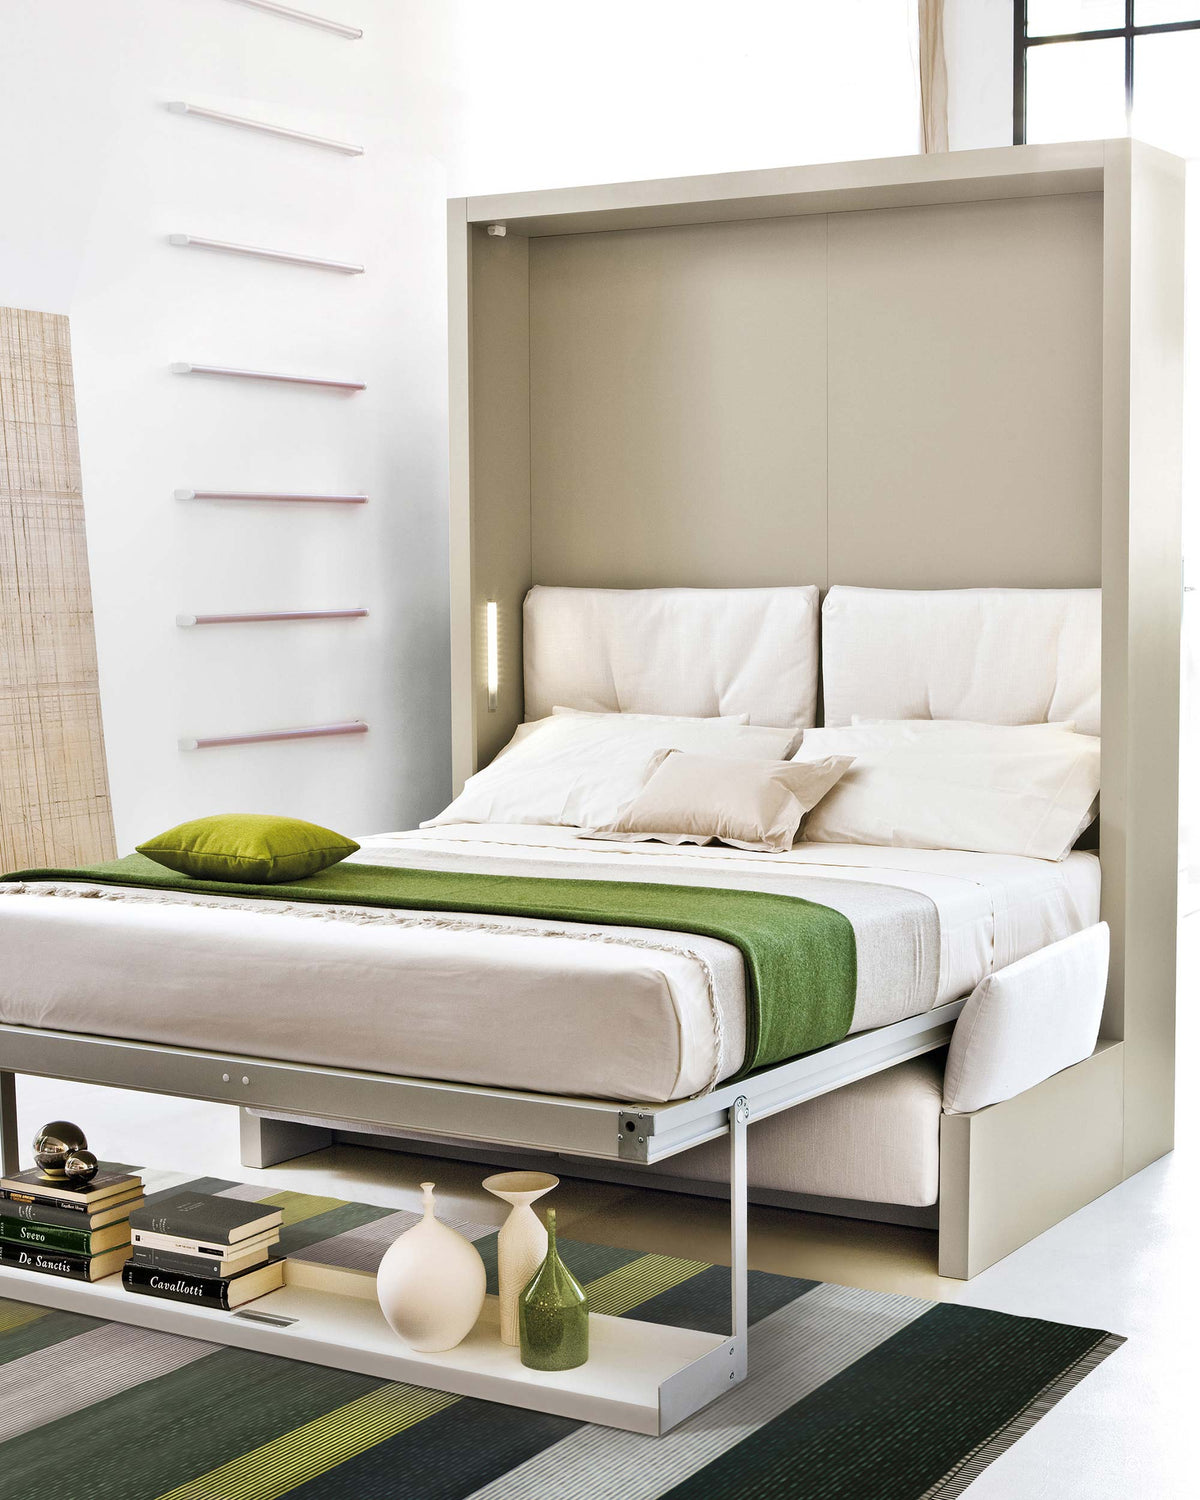 Murphy & Wall Beds For Sale Australia | The Comfort Shop